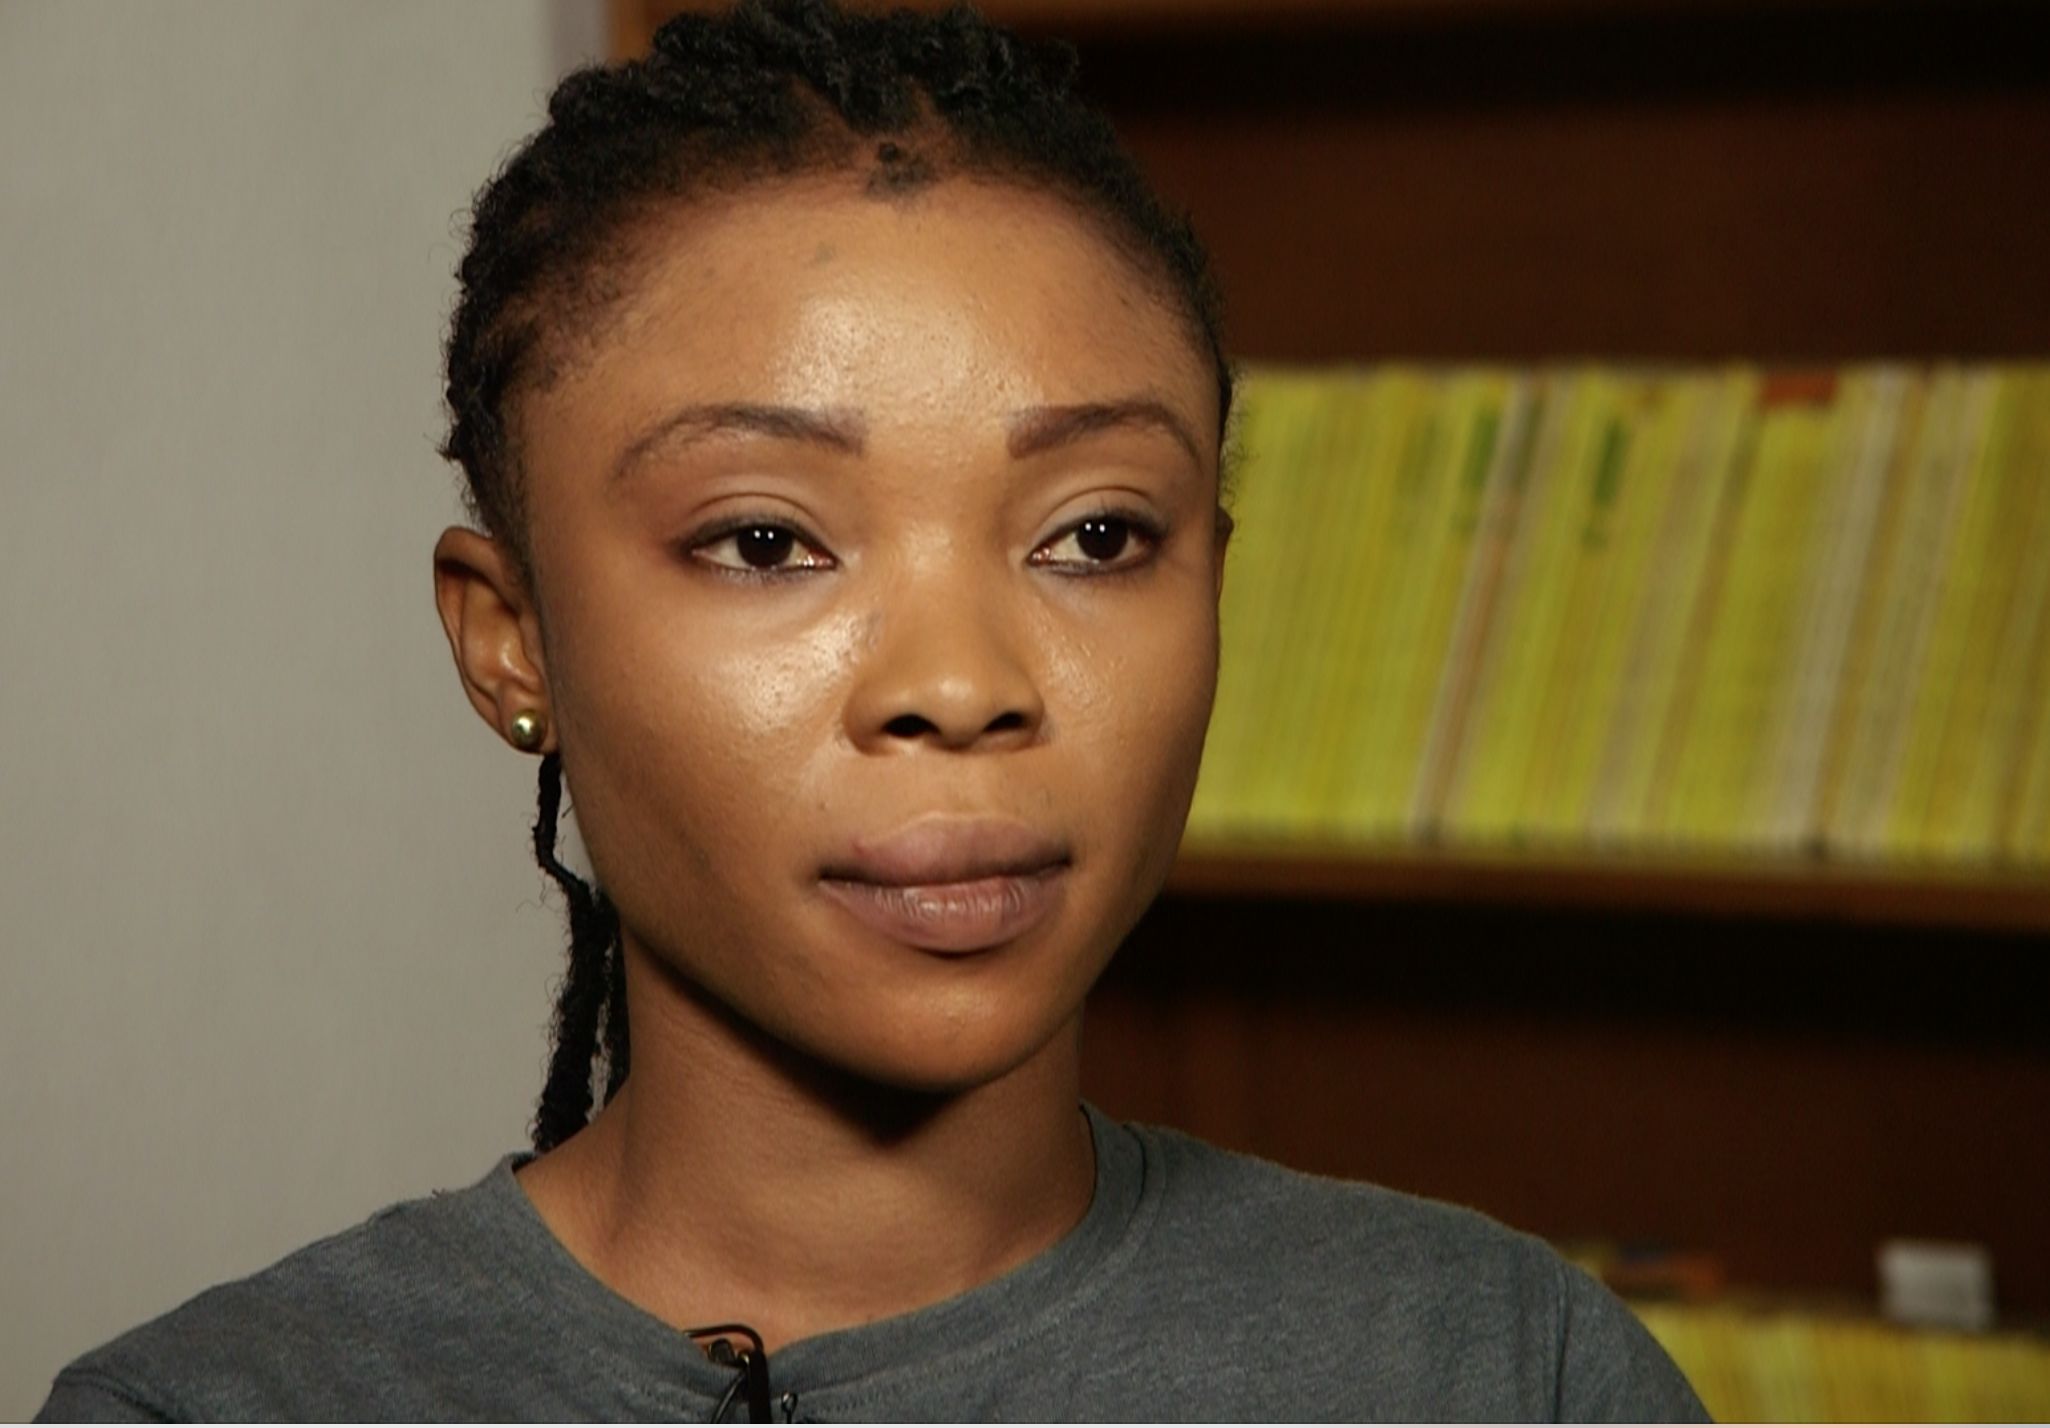 Madam Student Sex Vedo - Monica Osagie: Nigerian student who taped lecturer asking for sex speaks  out | CNN